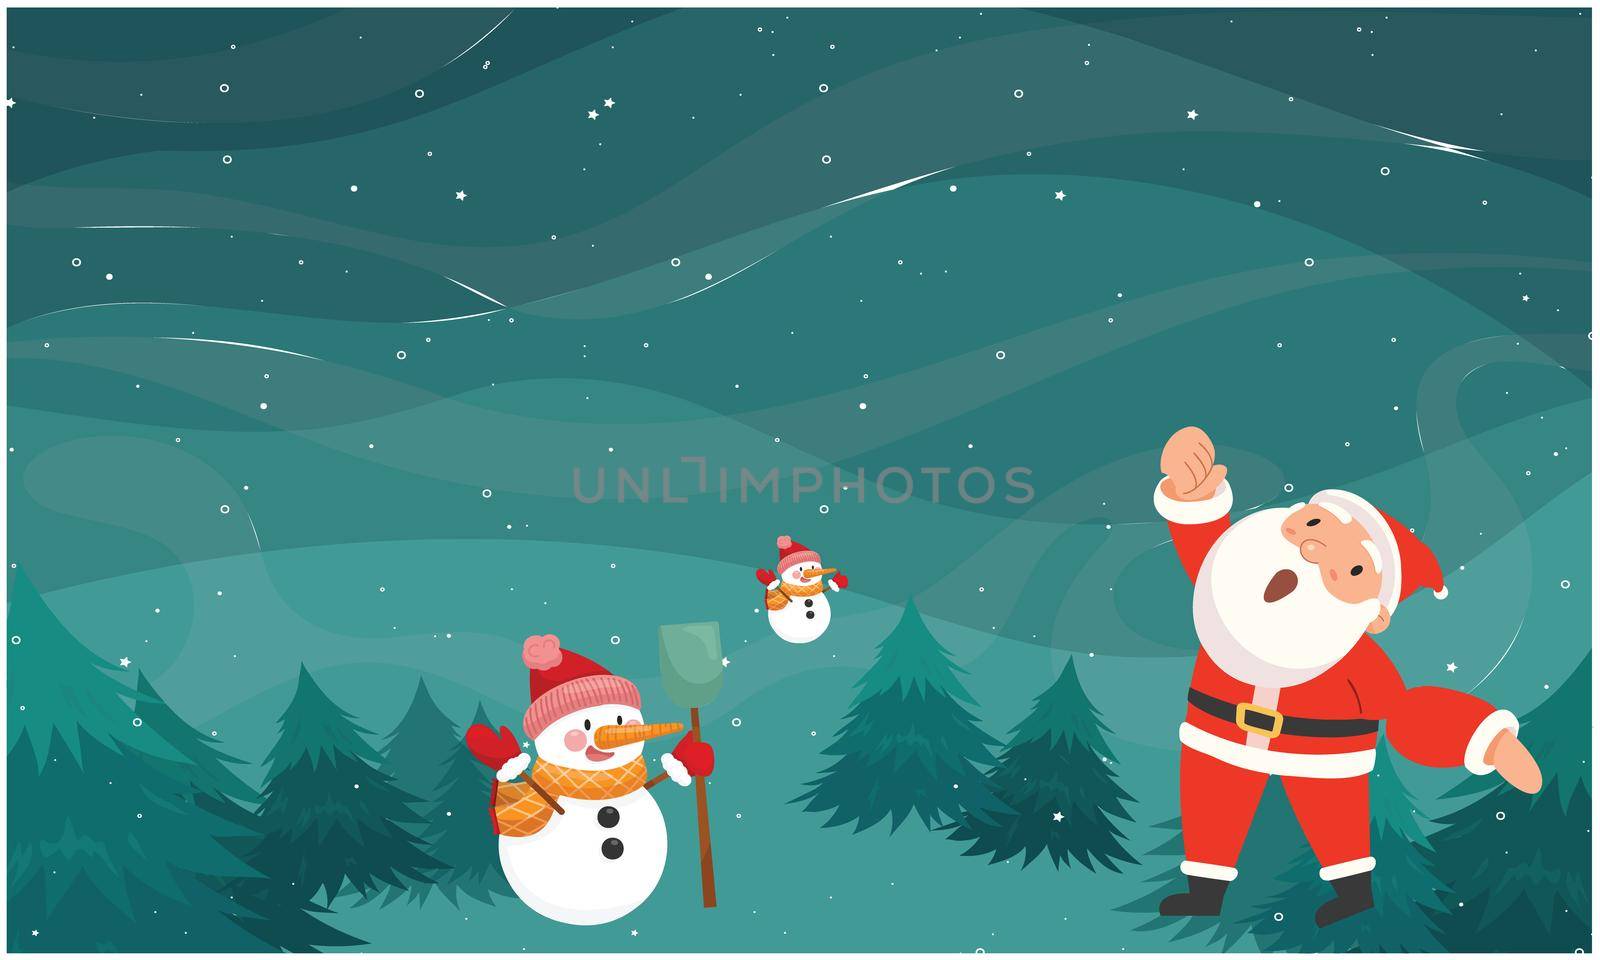 Santa Claus is playing with Snowman in the park during Christmas by aanavcreationsplus